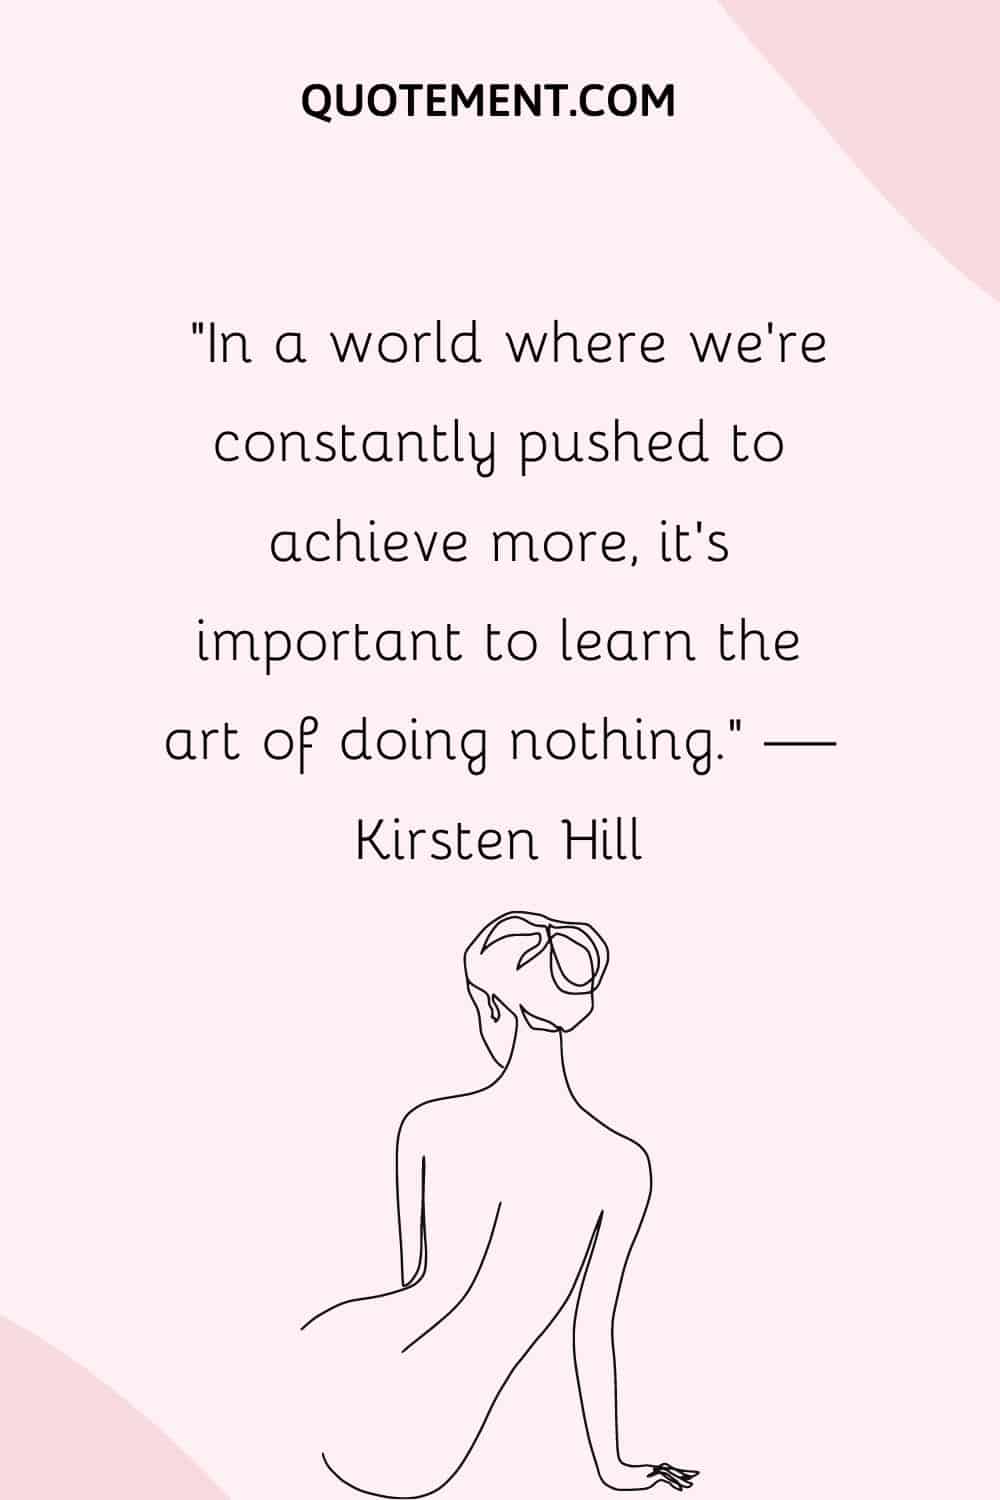 In a world where we’re constantly pushed to achieve more, it’s important to learn the art of doing nothing